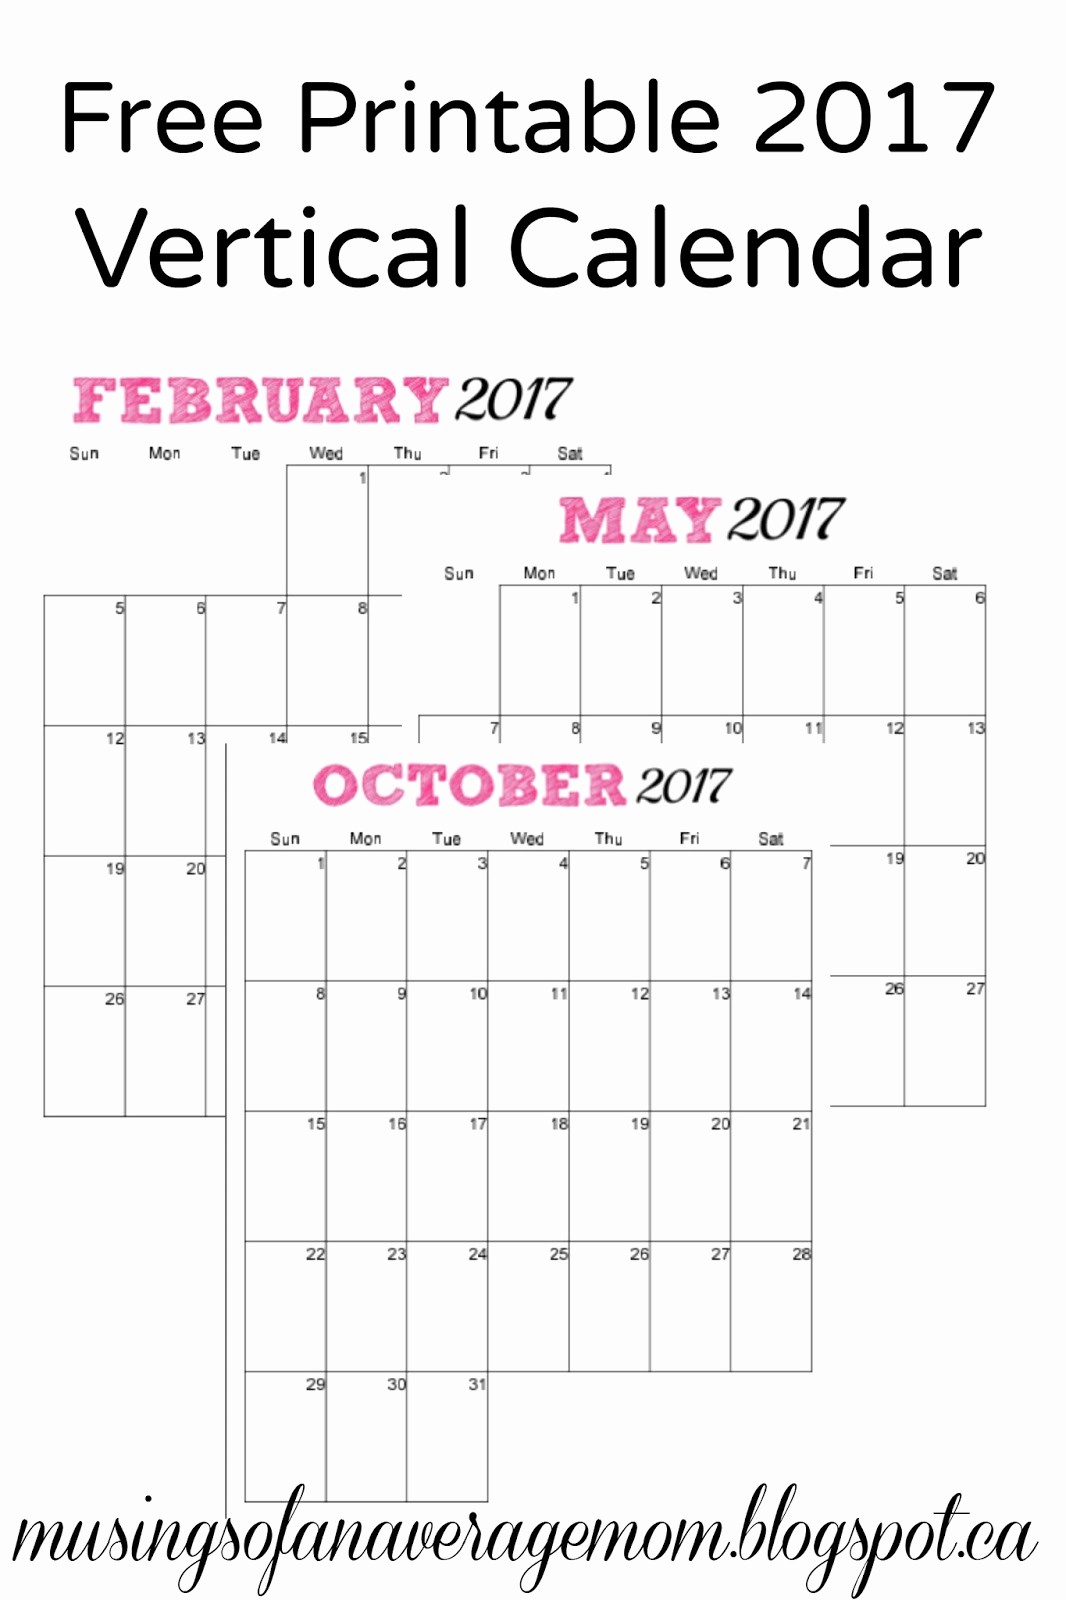 Free Printable Monthly 2017 Calendar Beautiful Musings Of An Average Mom Free 2017 Vertical Monthly Calendar